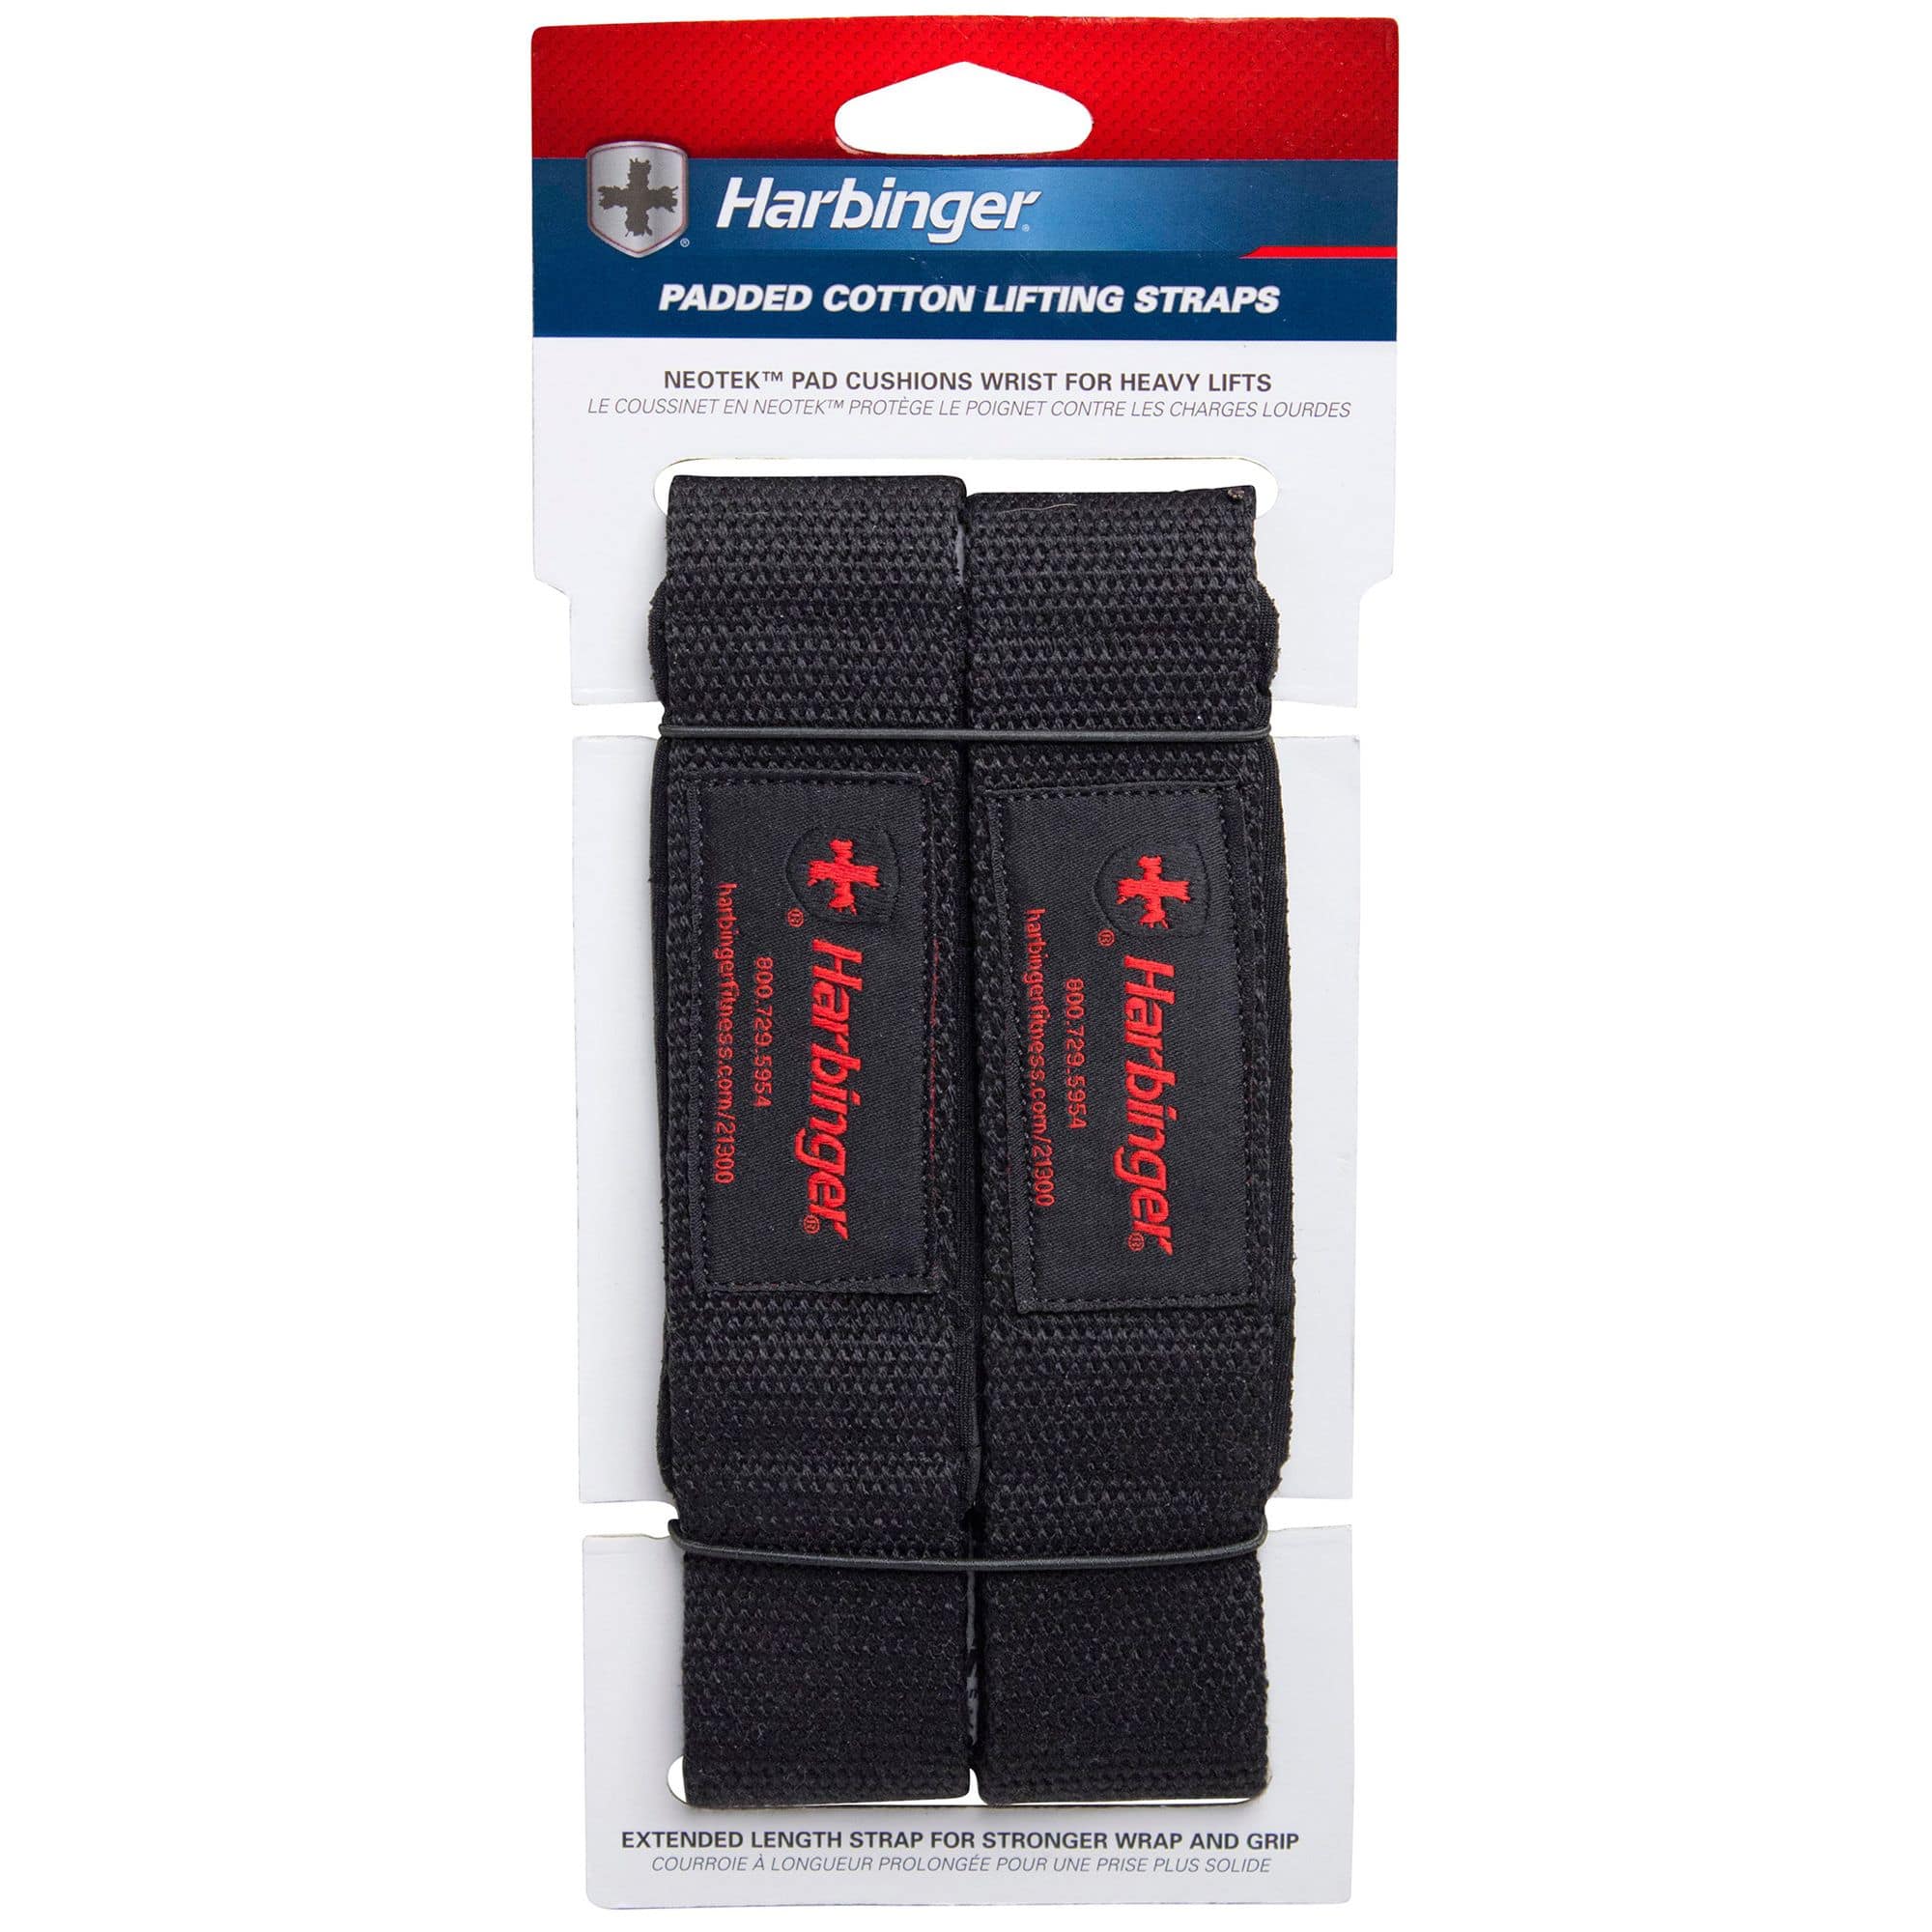 Harbinger Padded Cotton Lifting Straps, 21-in